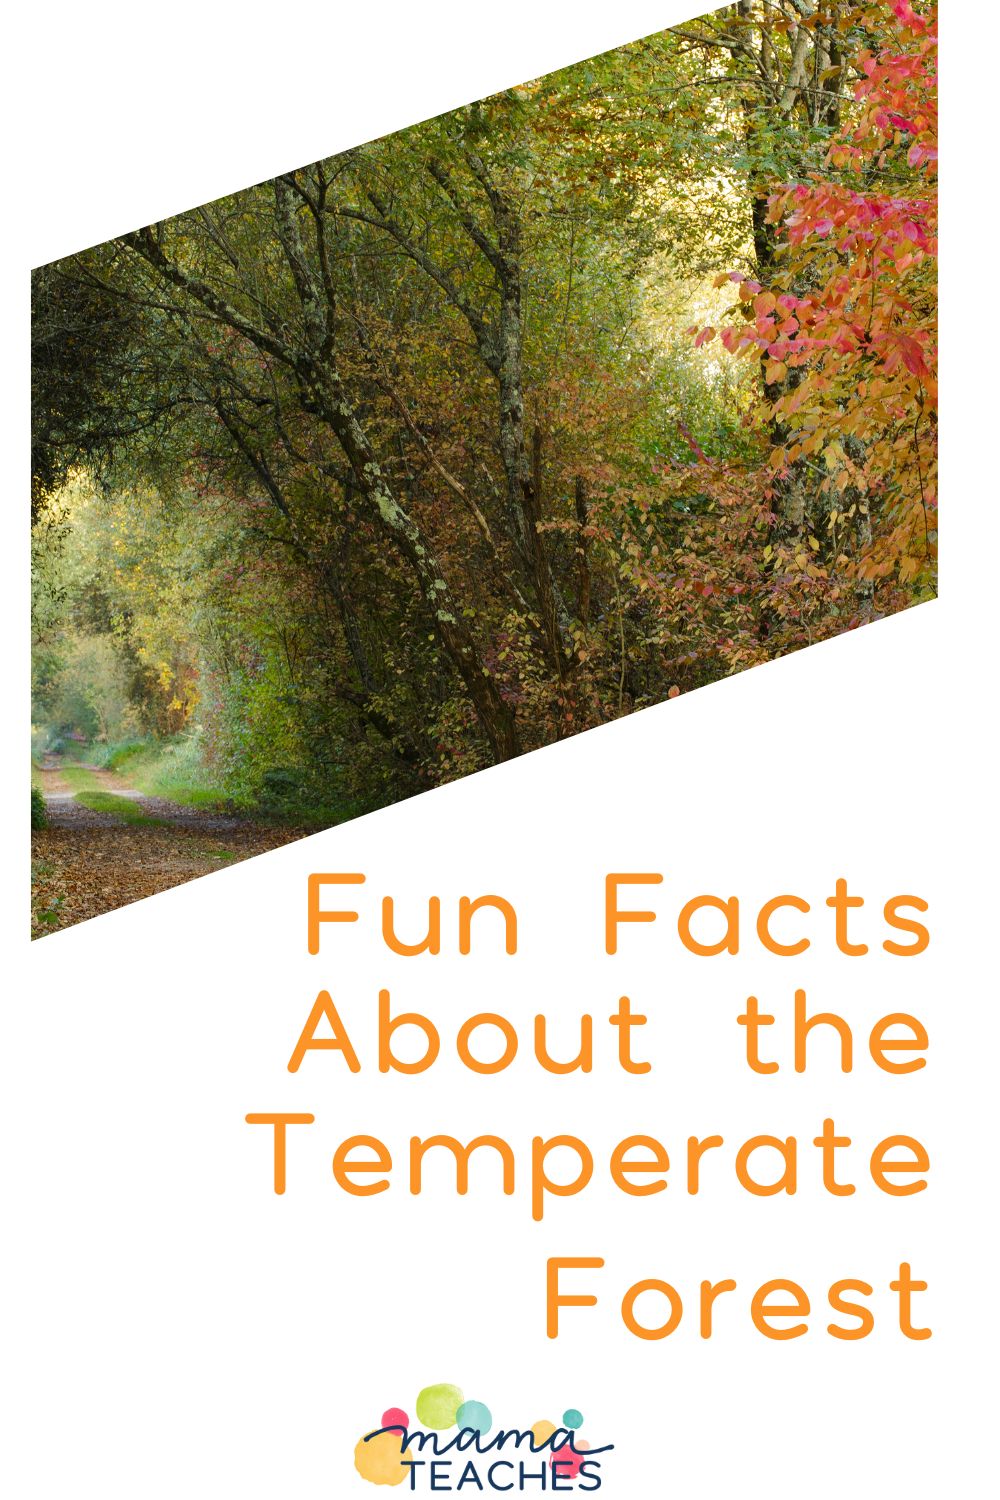 Fun Facts About the Temperate Forest